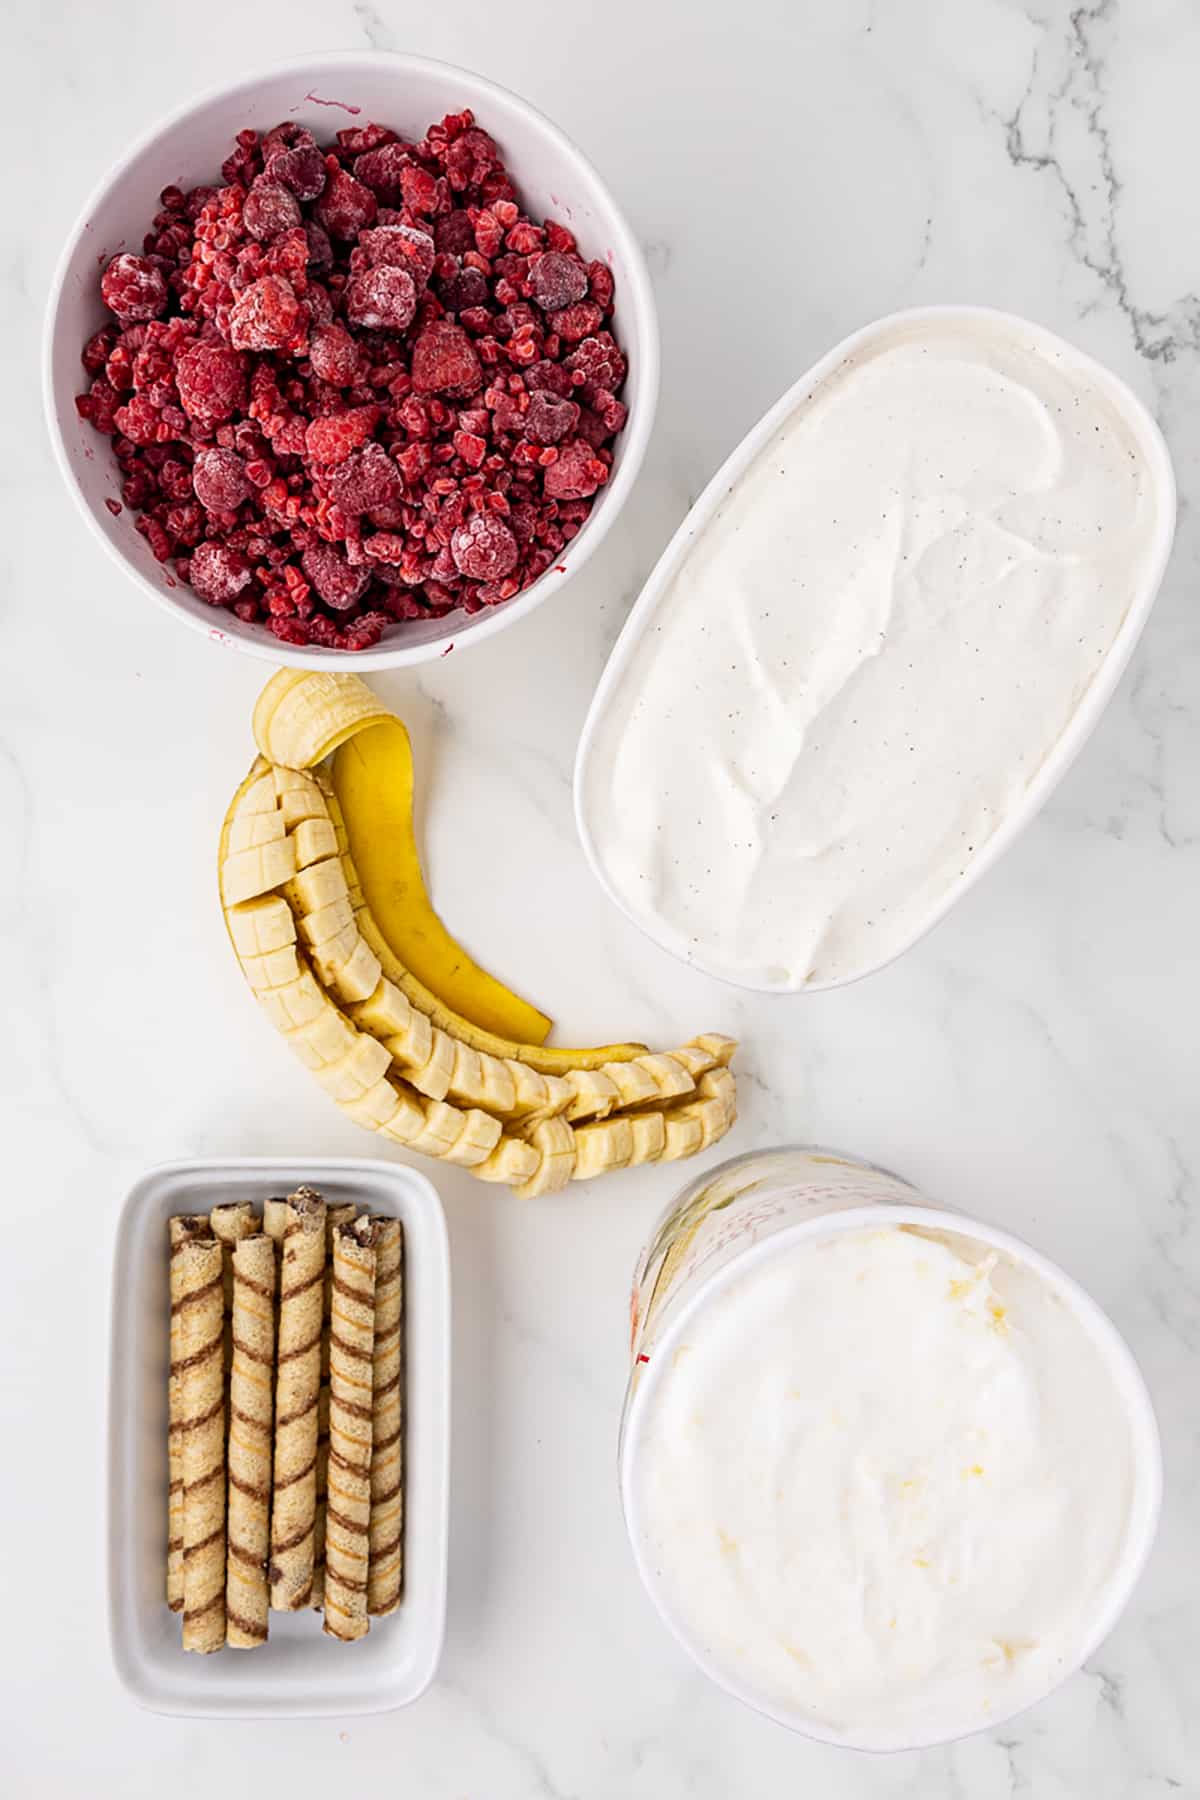 Ingredients for fresh fruit ice cream including container of vanilla ice cream, bowl of raspberries, whole banana peeled and cut into pieces, and tray of thin, tubular cookie wafers filled with chocolate